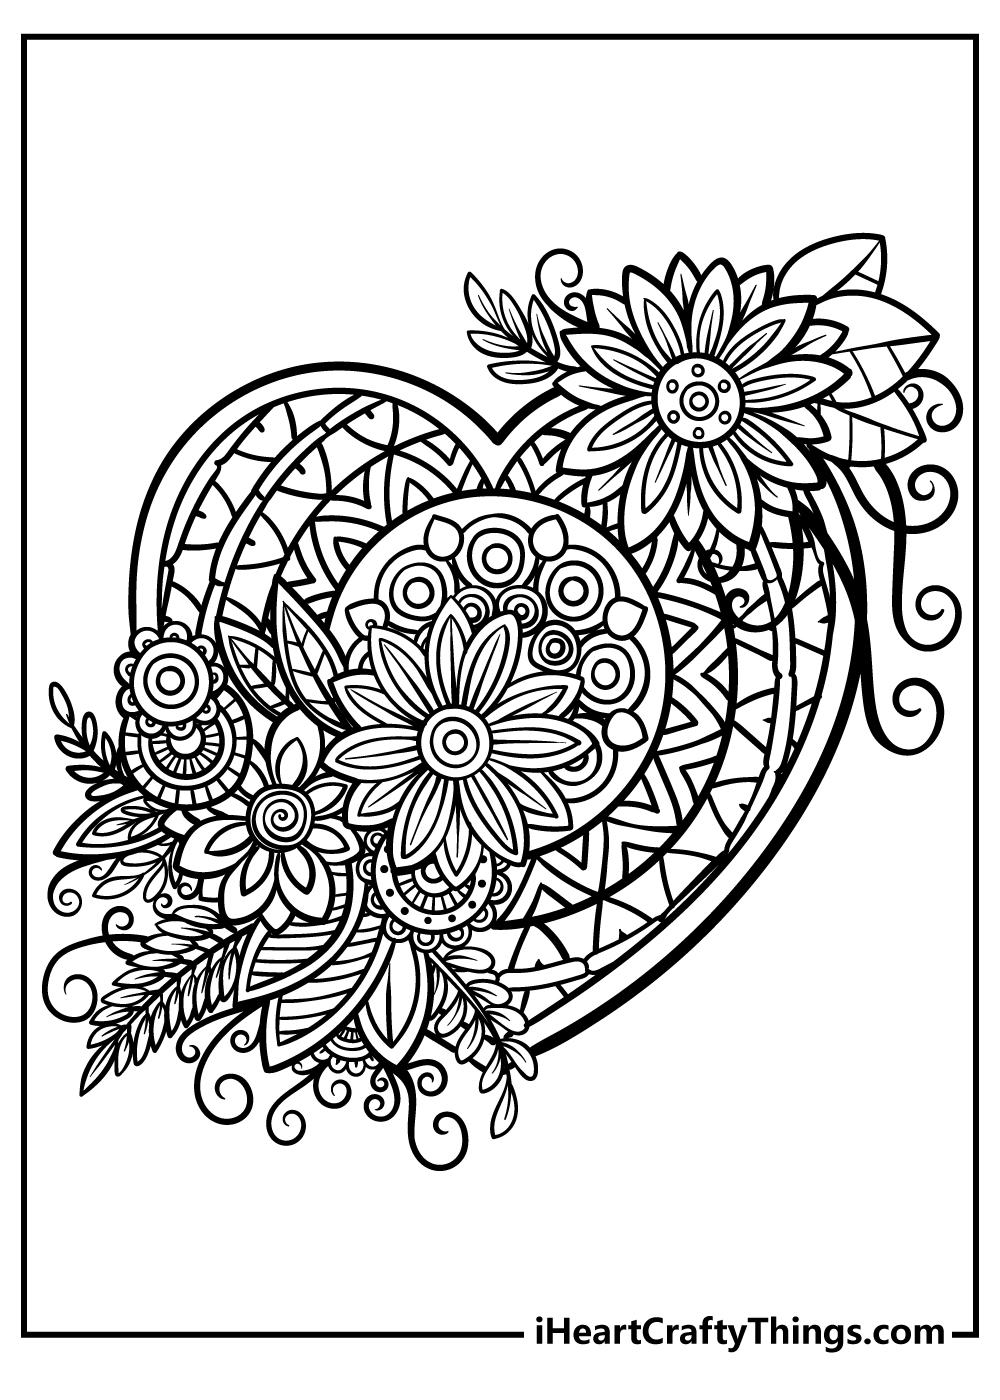 Free Printable Adult Coloring Pages Printable Templates Free